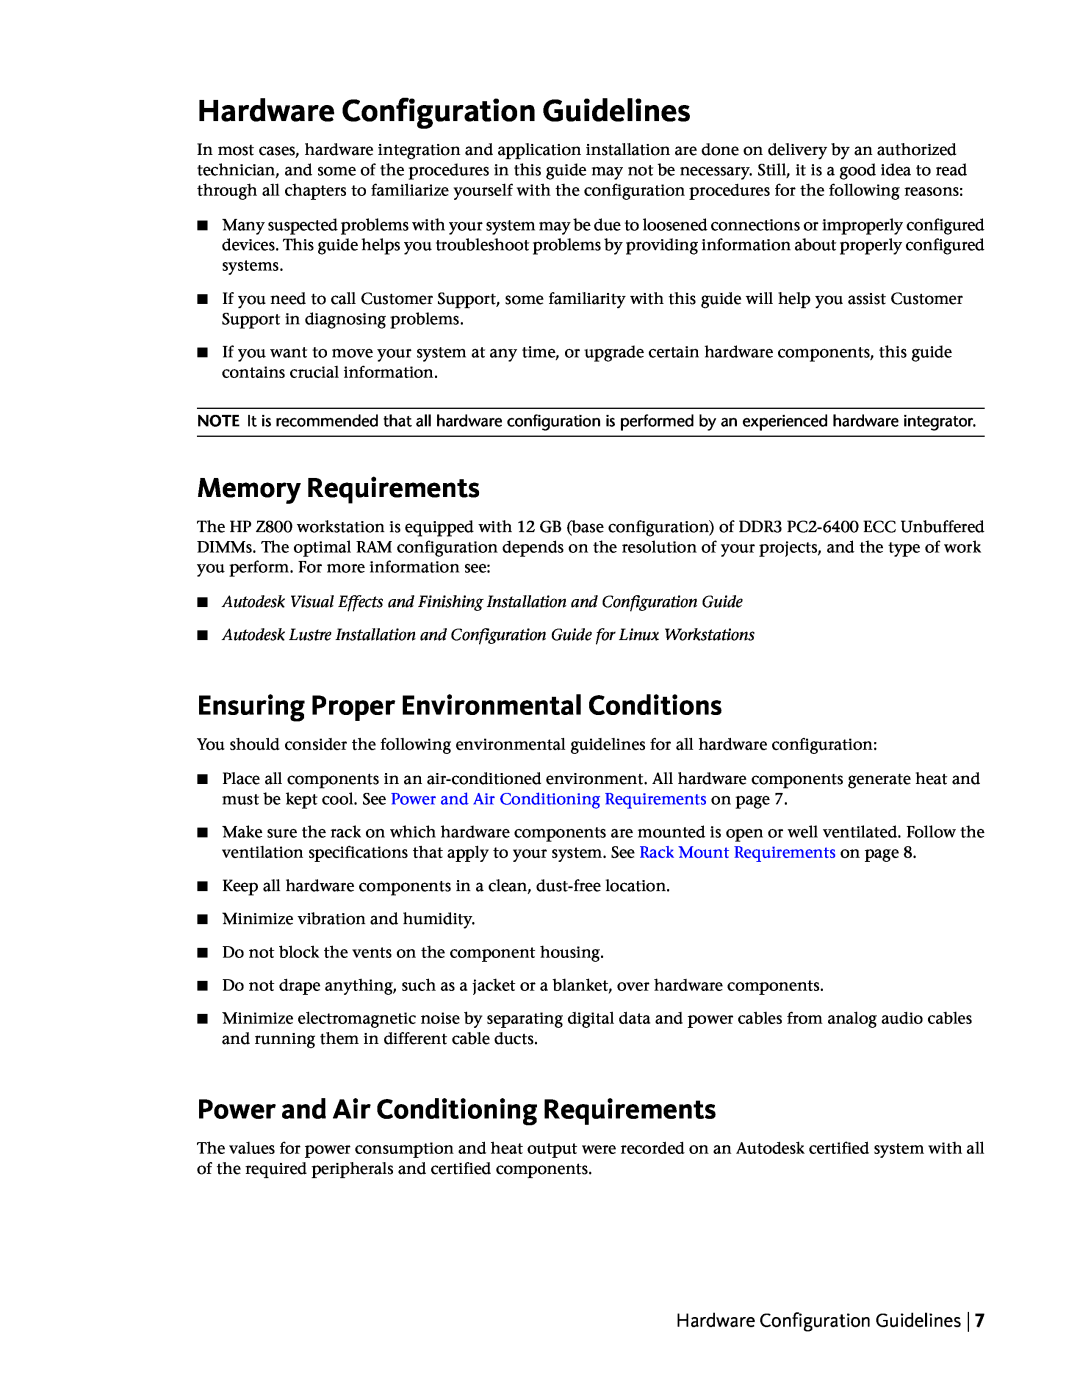 HP Z800 manual Hardware Configuration Guidelines, Memory Requirements, Ensuring Proper Environmental Conditions 